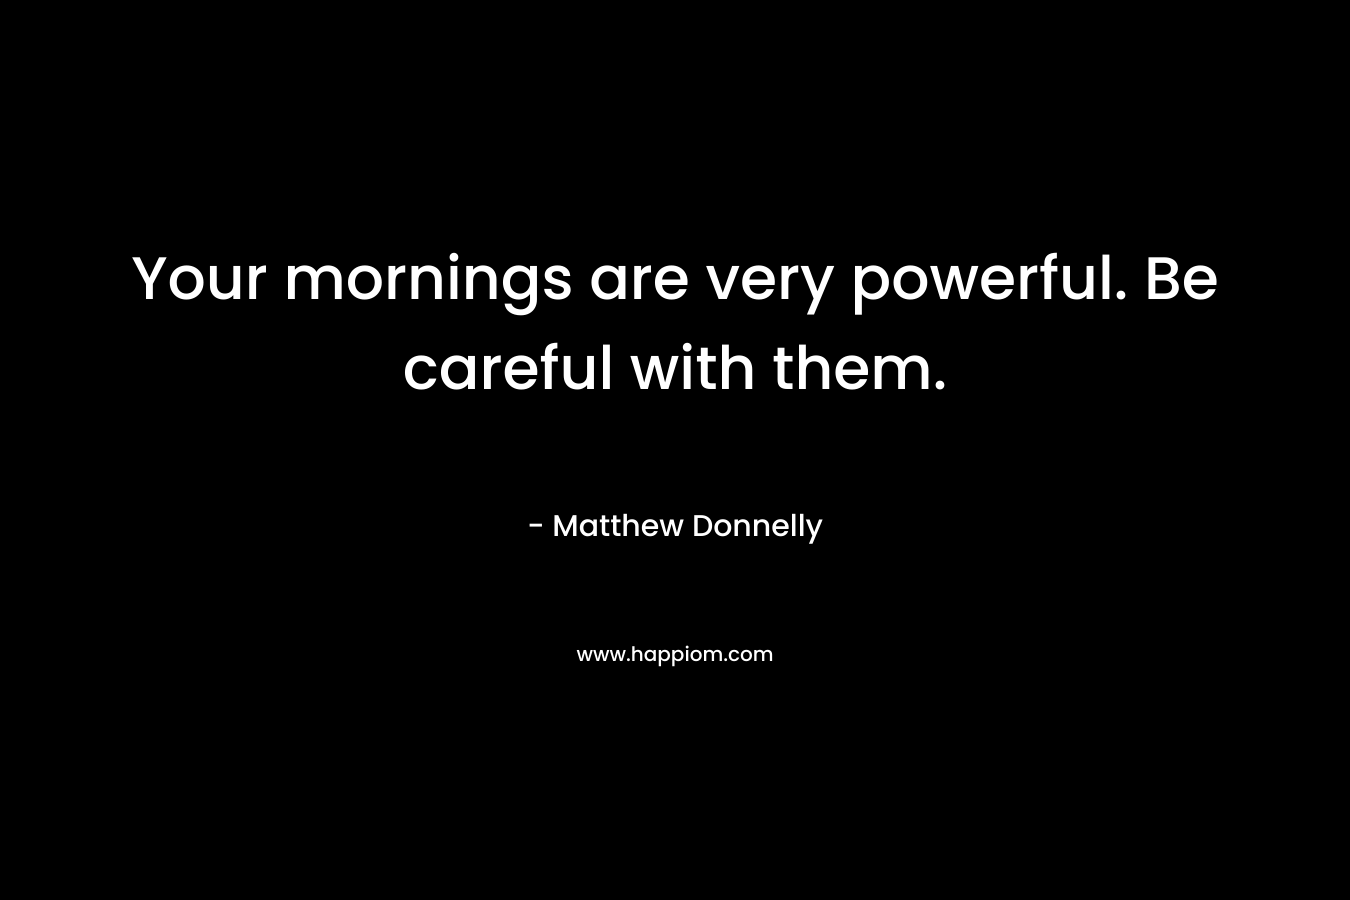 Your mornings are very powerful. Be careful with them.